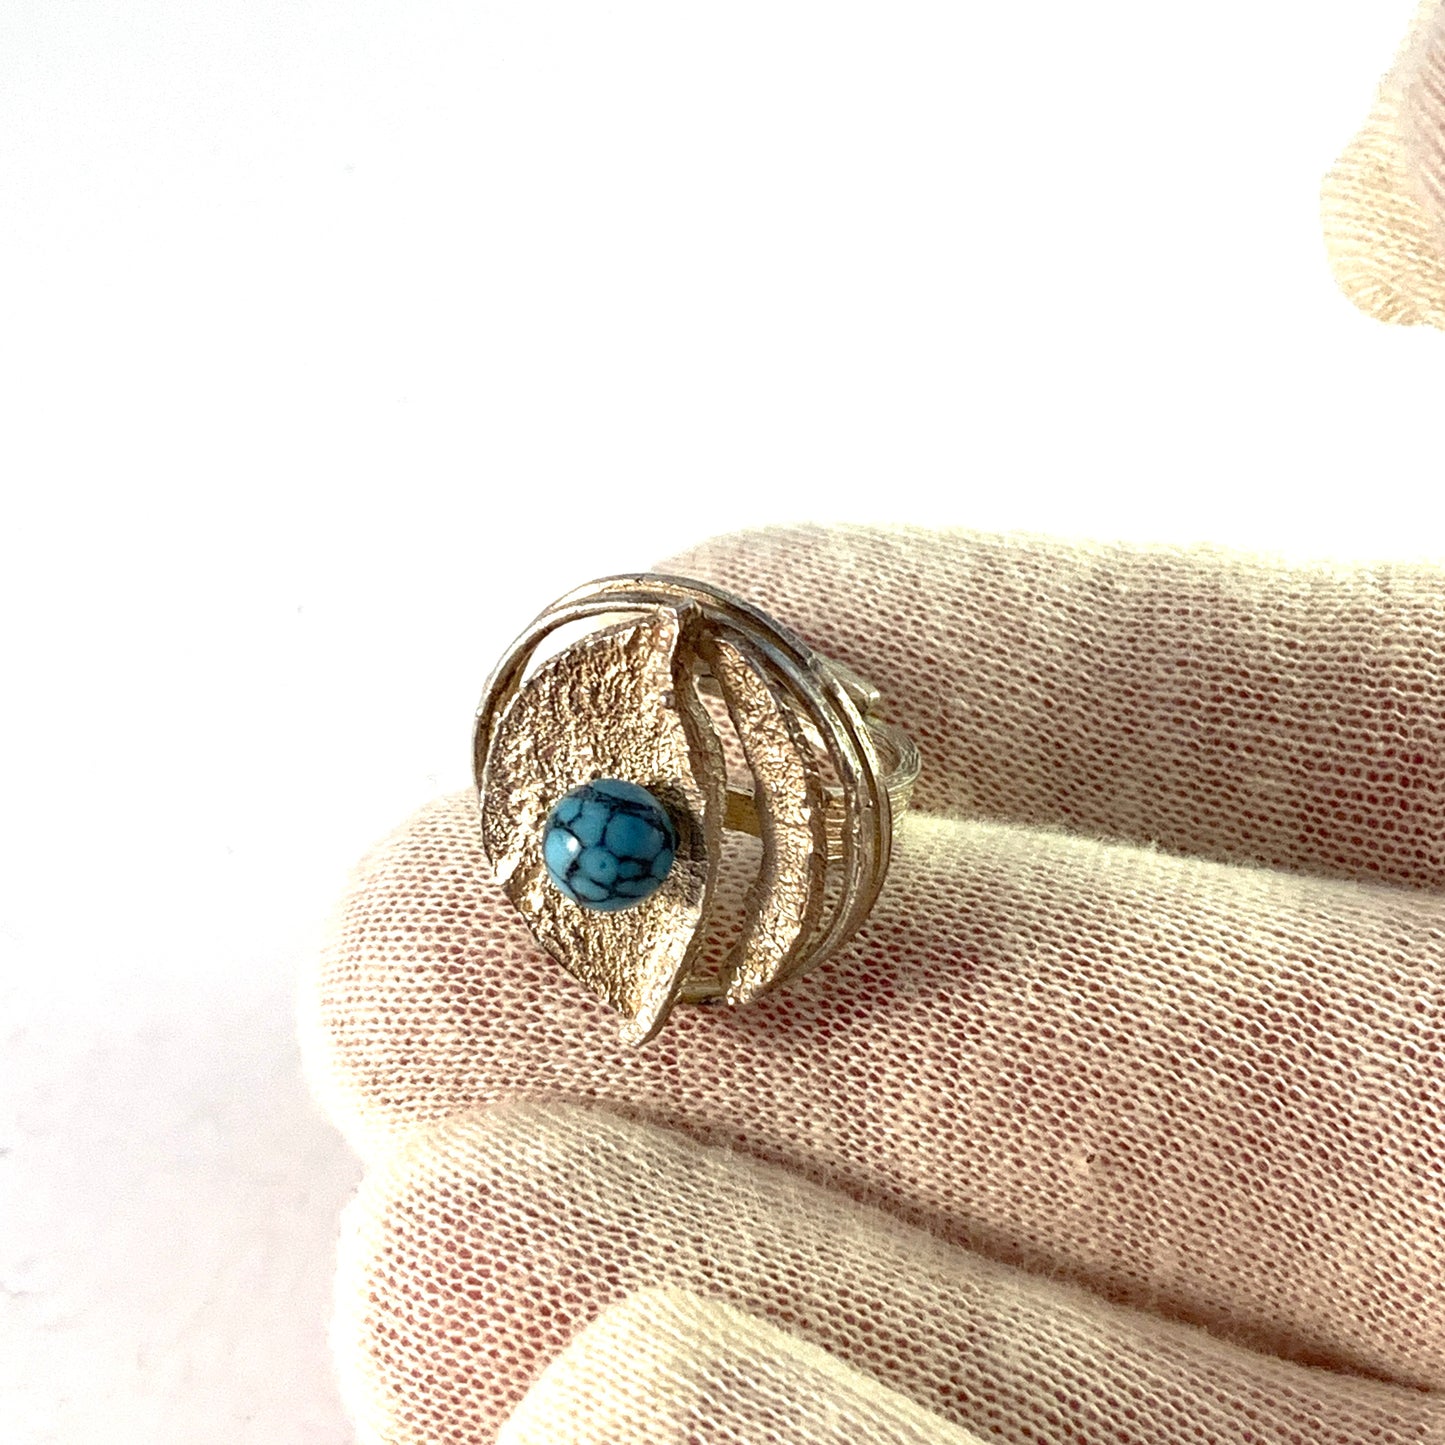 Germany 1970s. Vintage 835 Silver Faux Turquoise Ring.